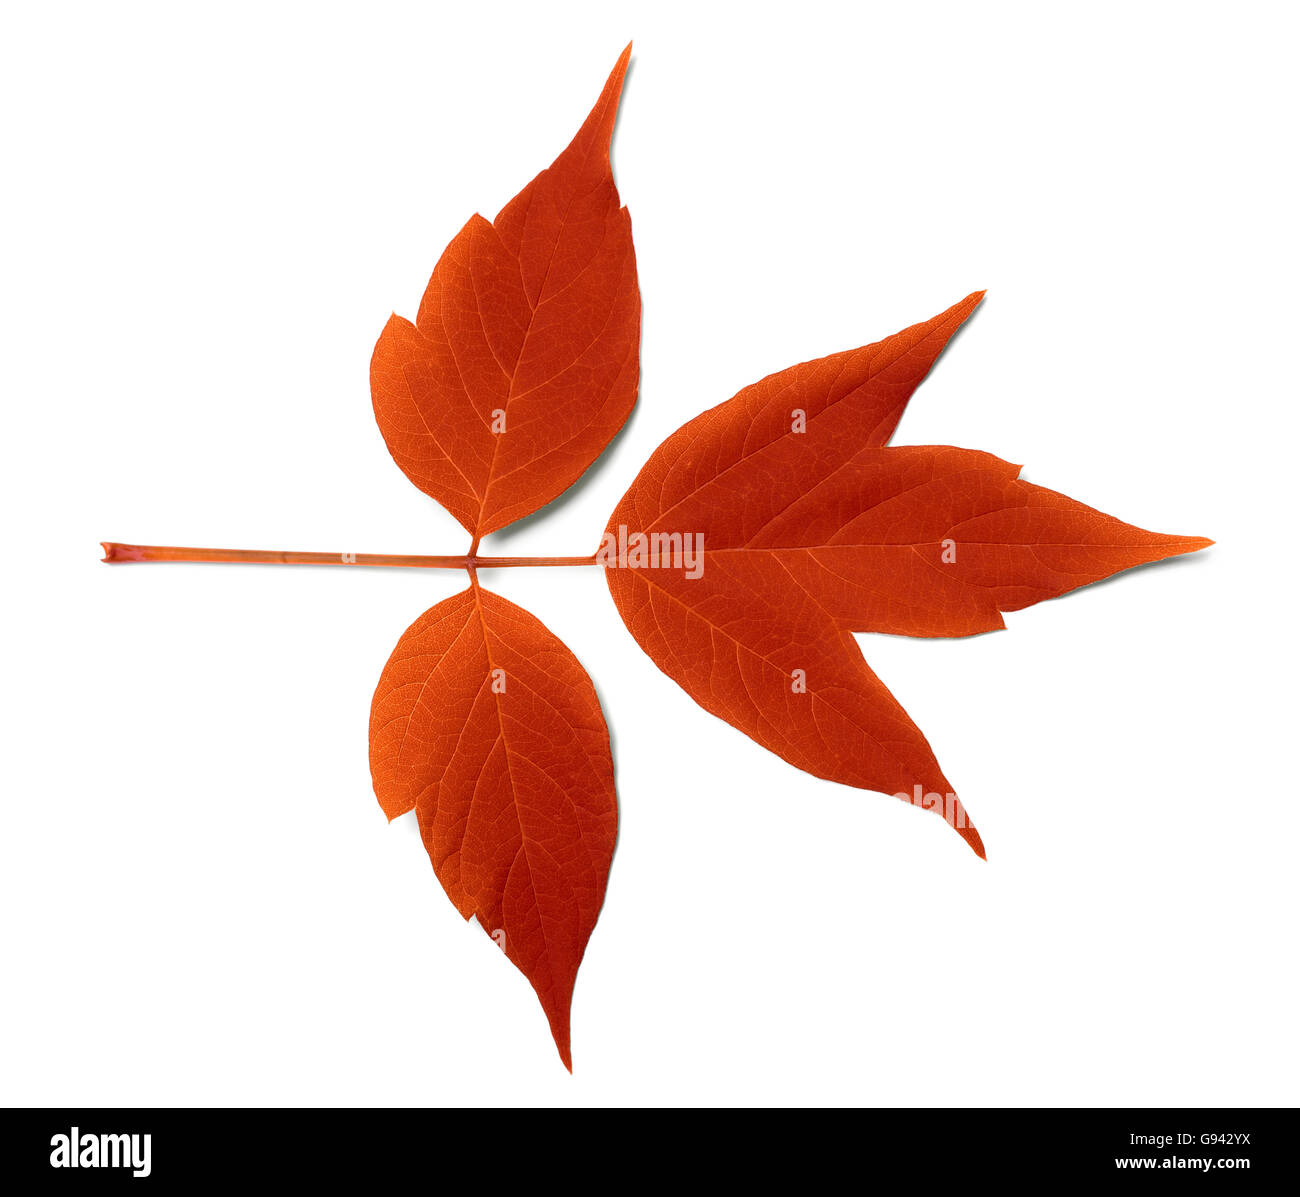 Red autumn leaf. Isolated on white background. Stock Photo